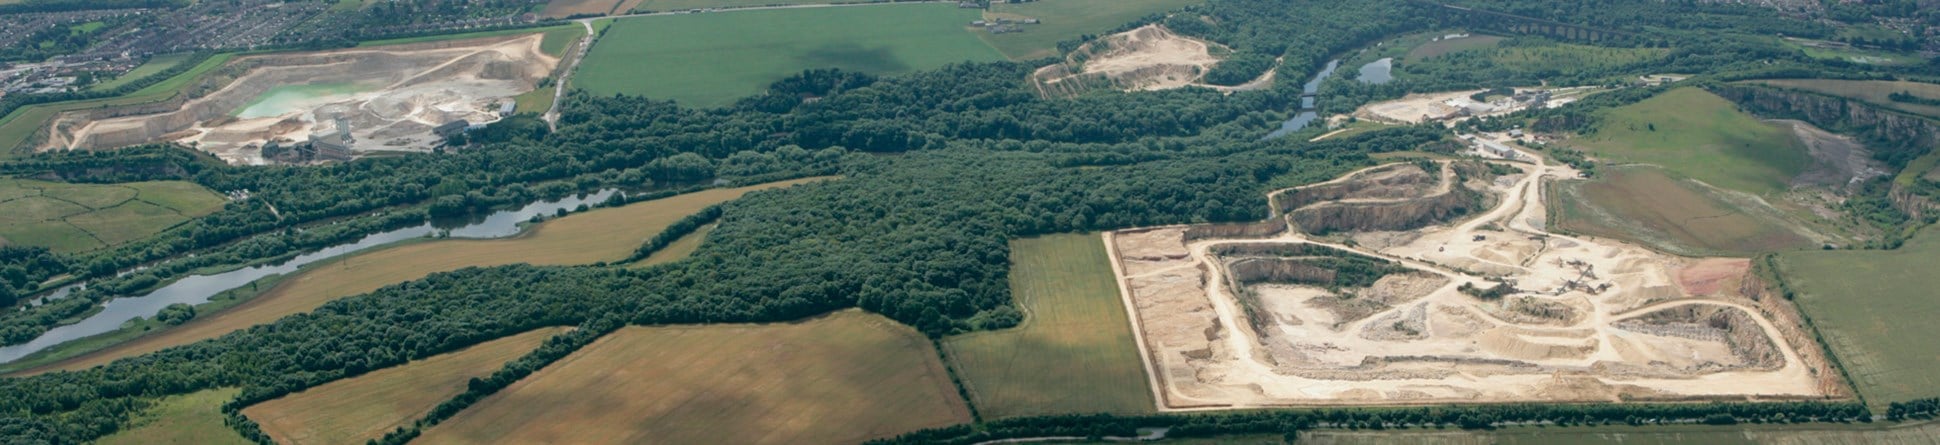 Colour aerial photograph showing a couple of large quarries with a tree lined river running between them